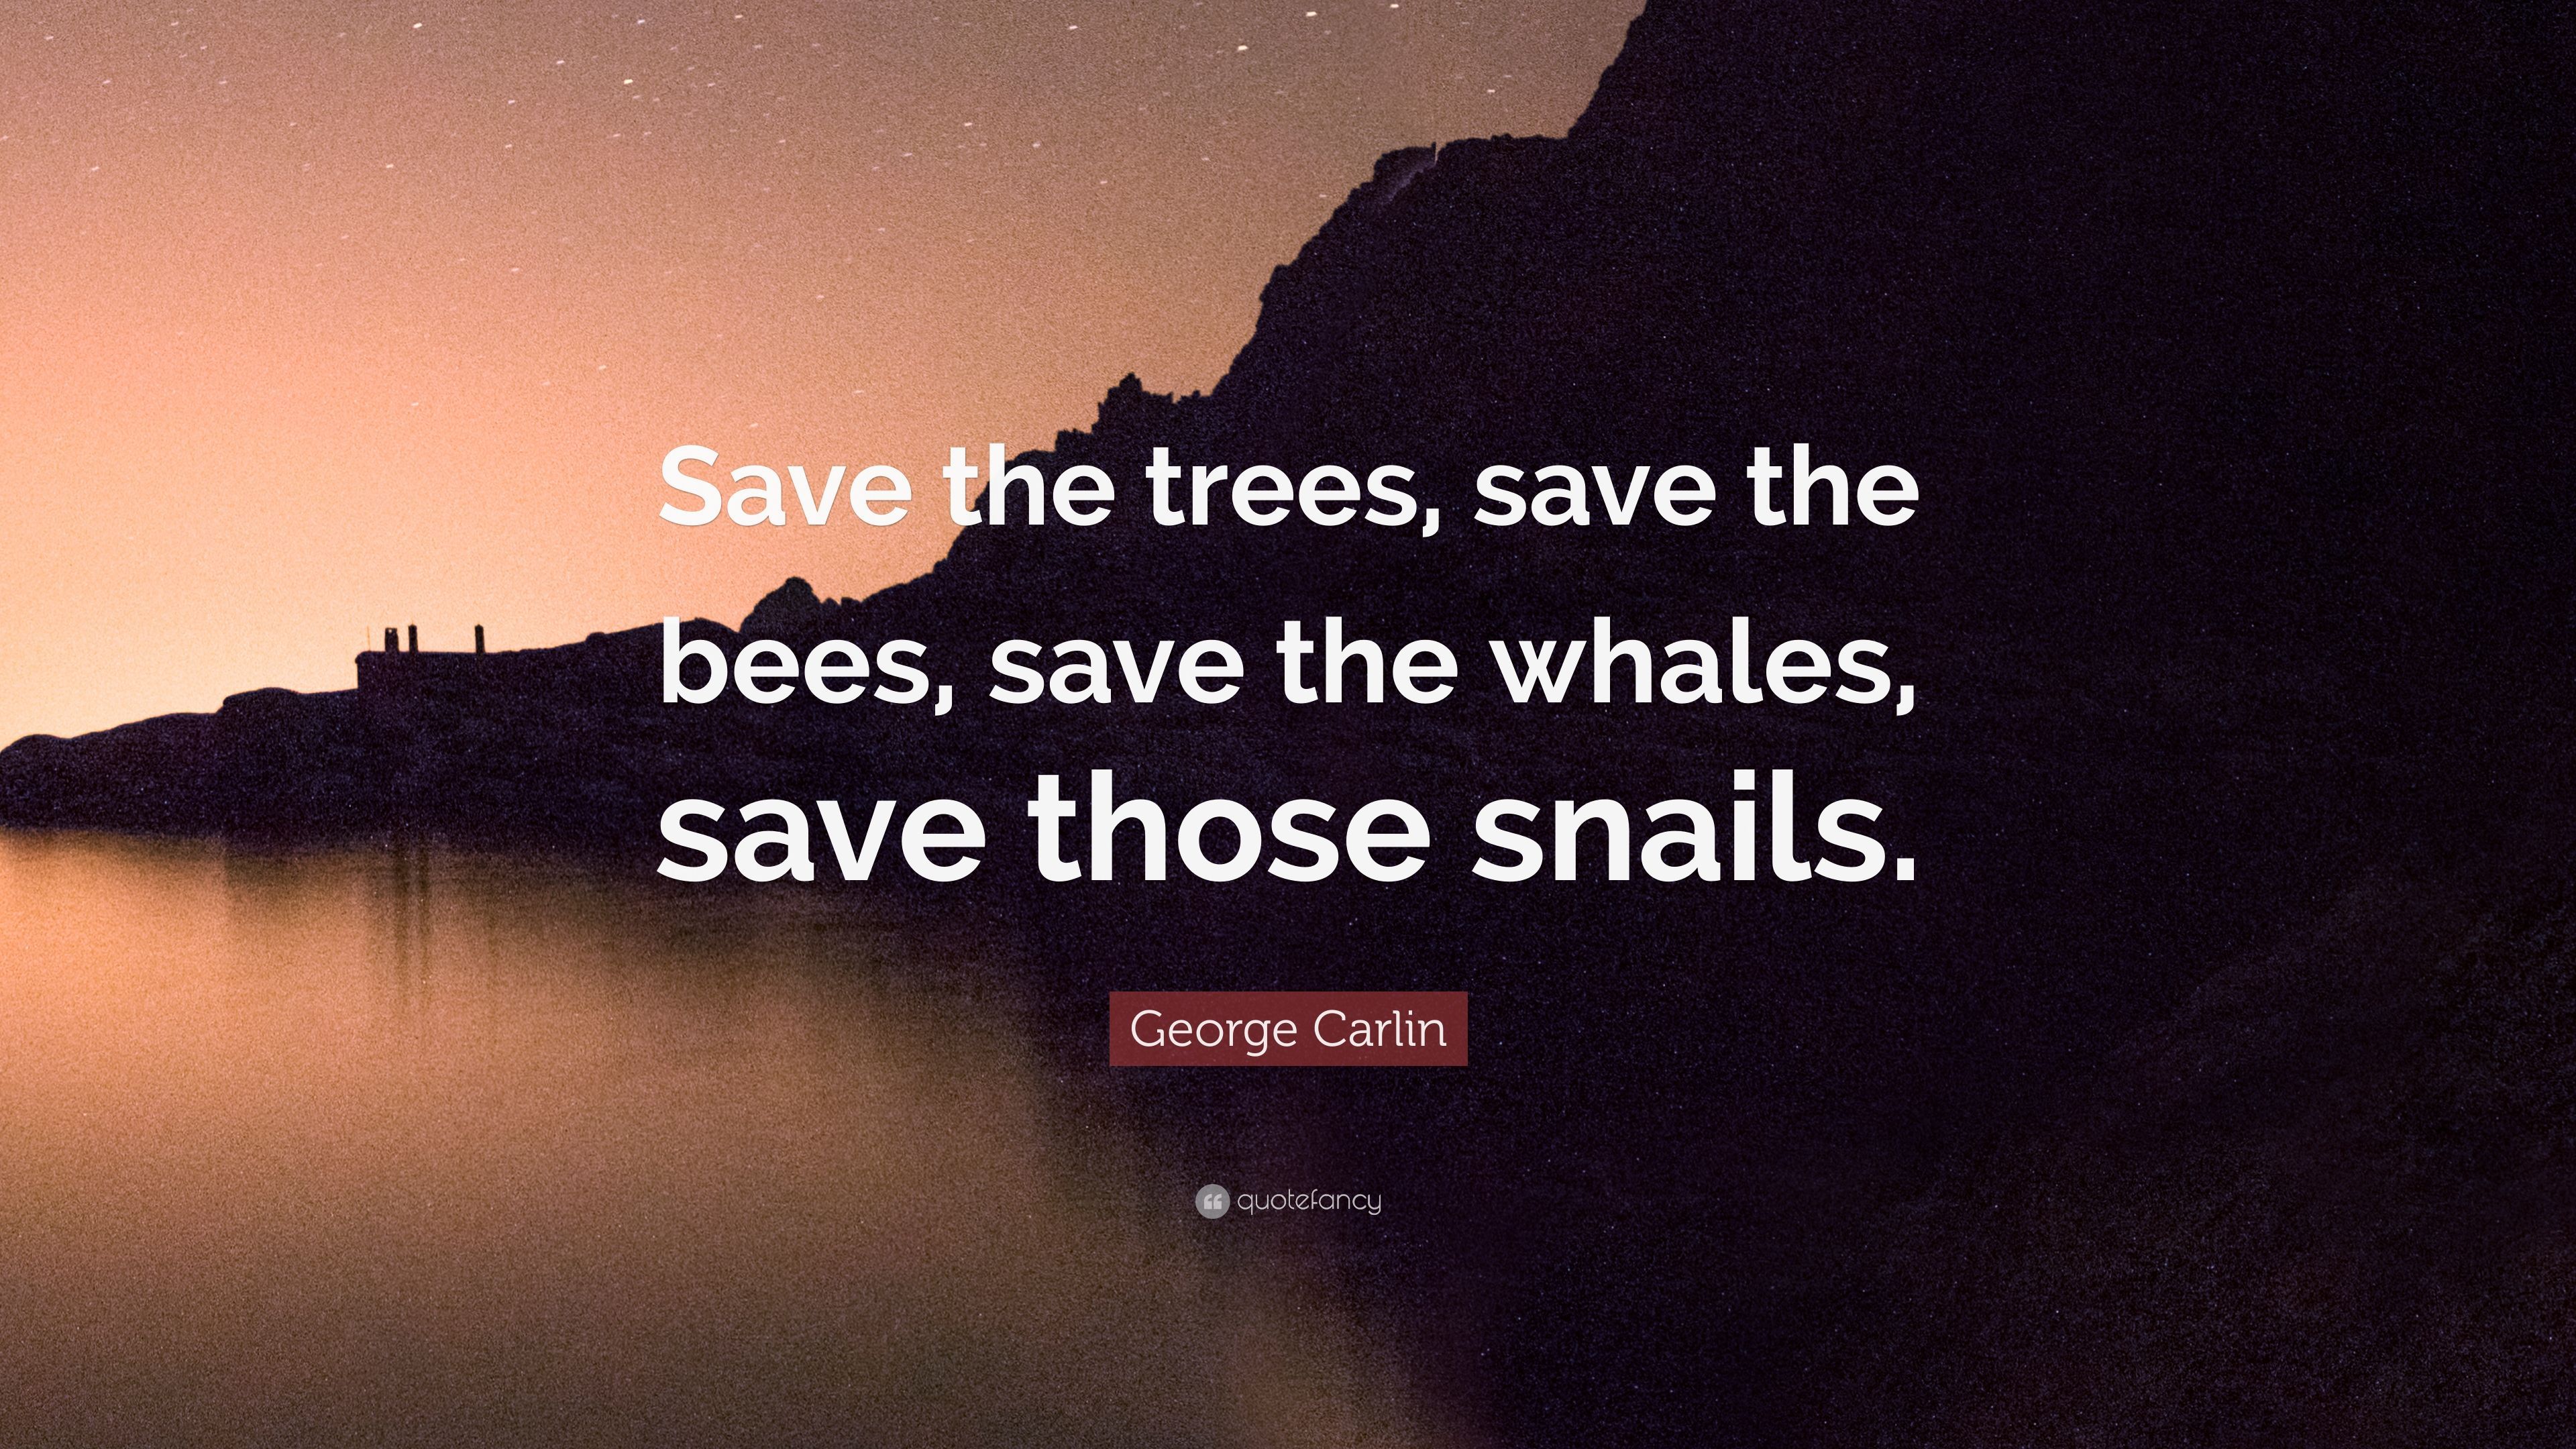 George Carlin Quote: “Save the trees, save the bees, save the whales, save those snails.” (7 wallpaper)